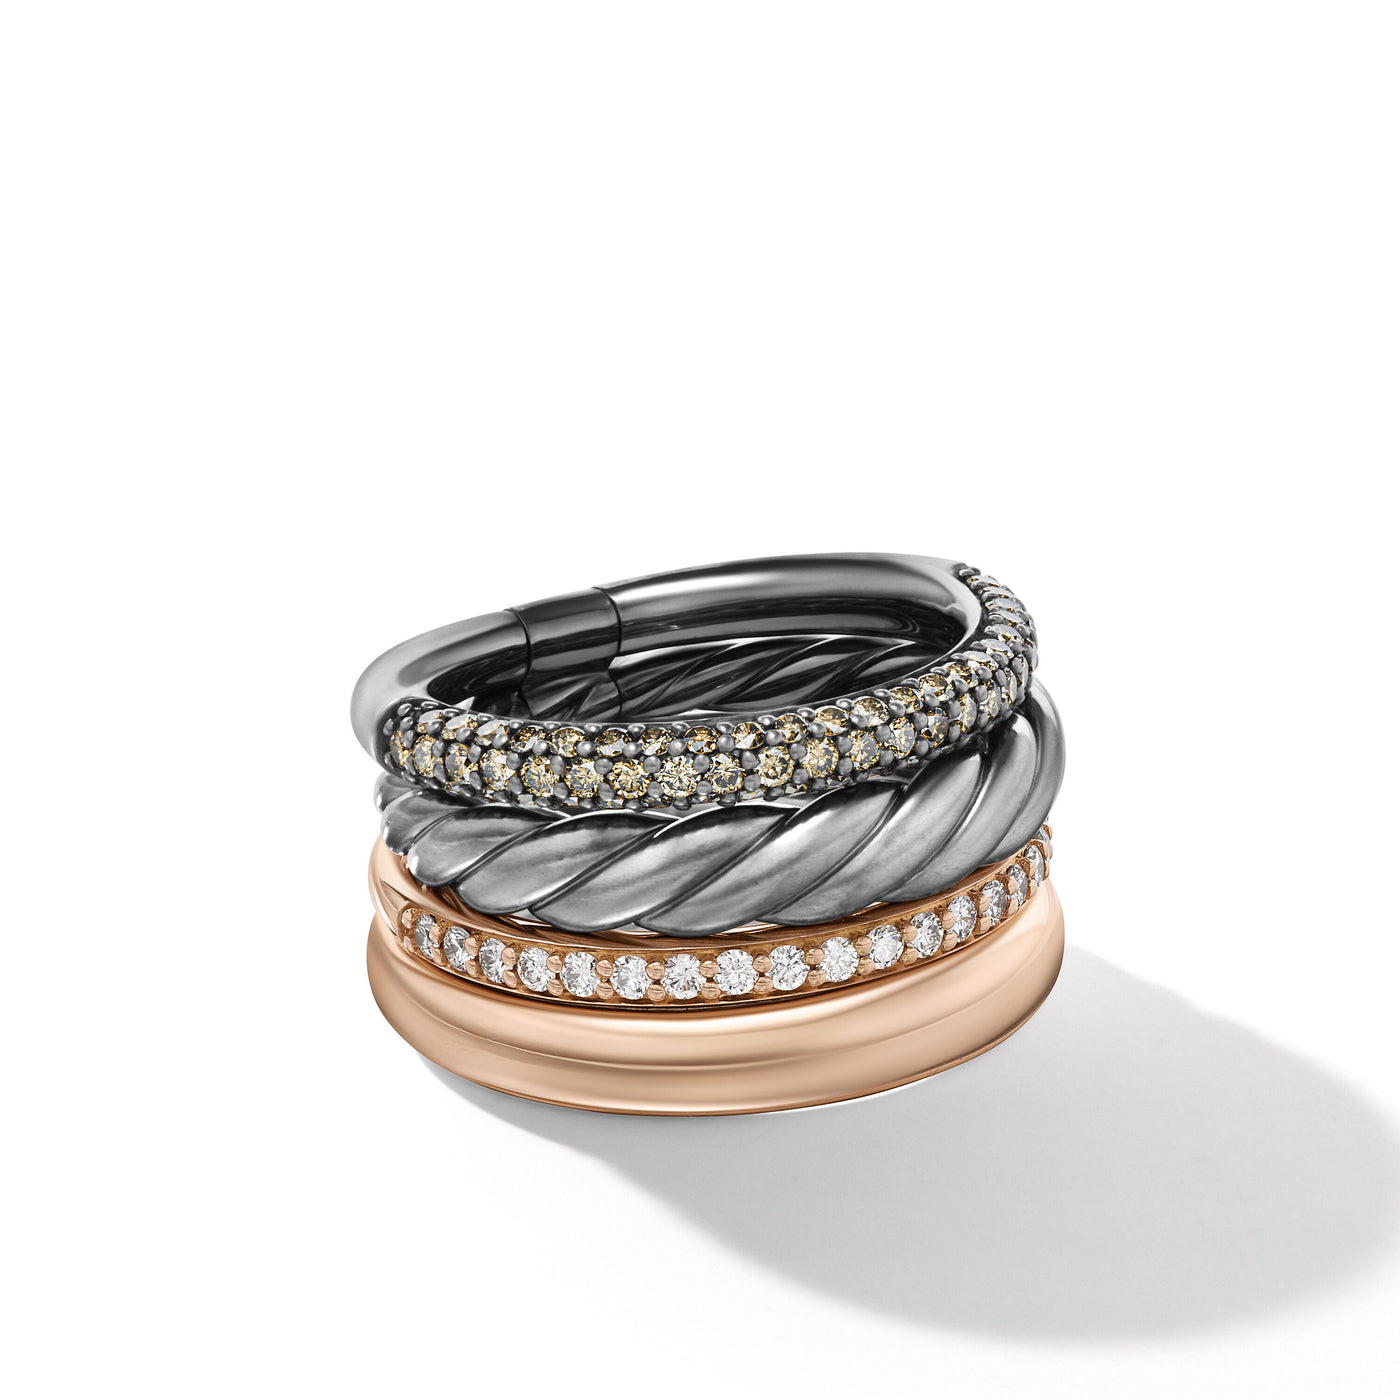 DY Mercer™ Melange Multi Row Ring in Sterling Silver with 18K Rose Gold and Diamonds\, 14mm